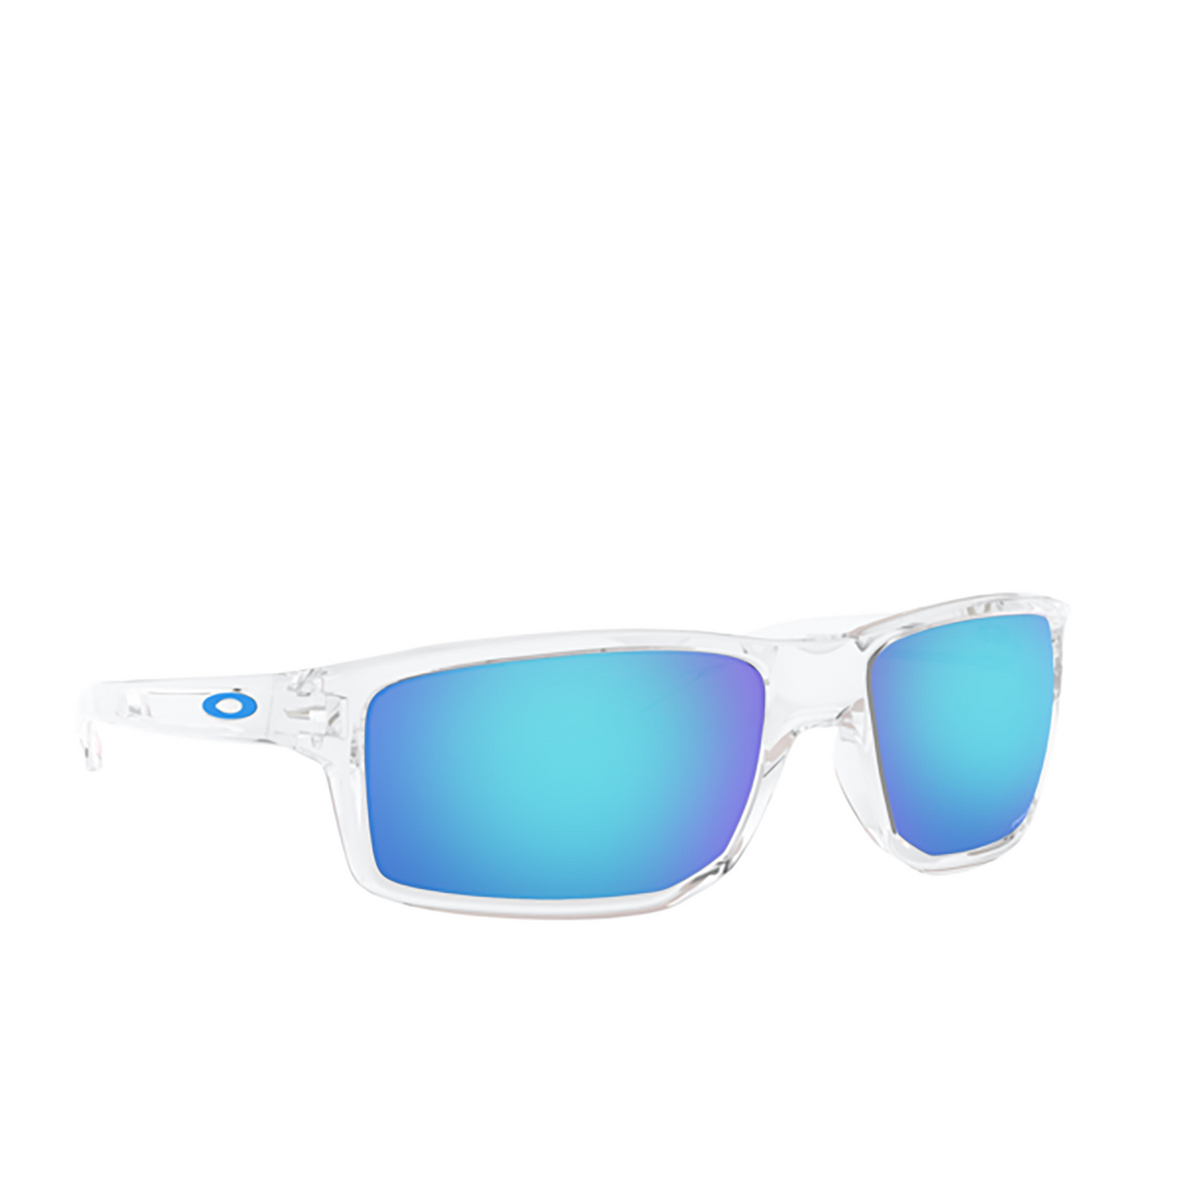 Oakley GIBSTON Sunglasses 944904 POLISHED CLEAR - three-quarters view